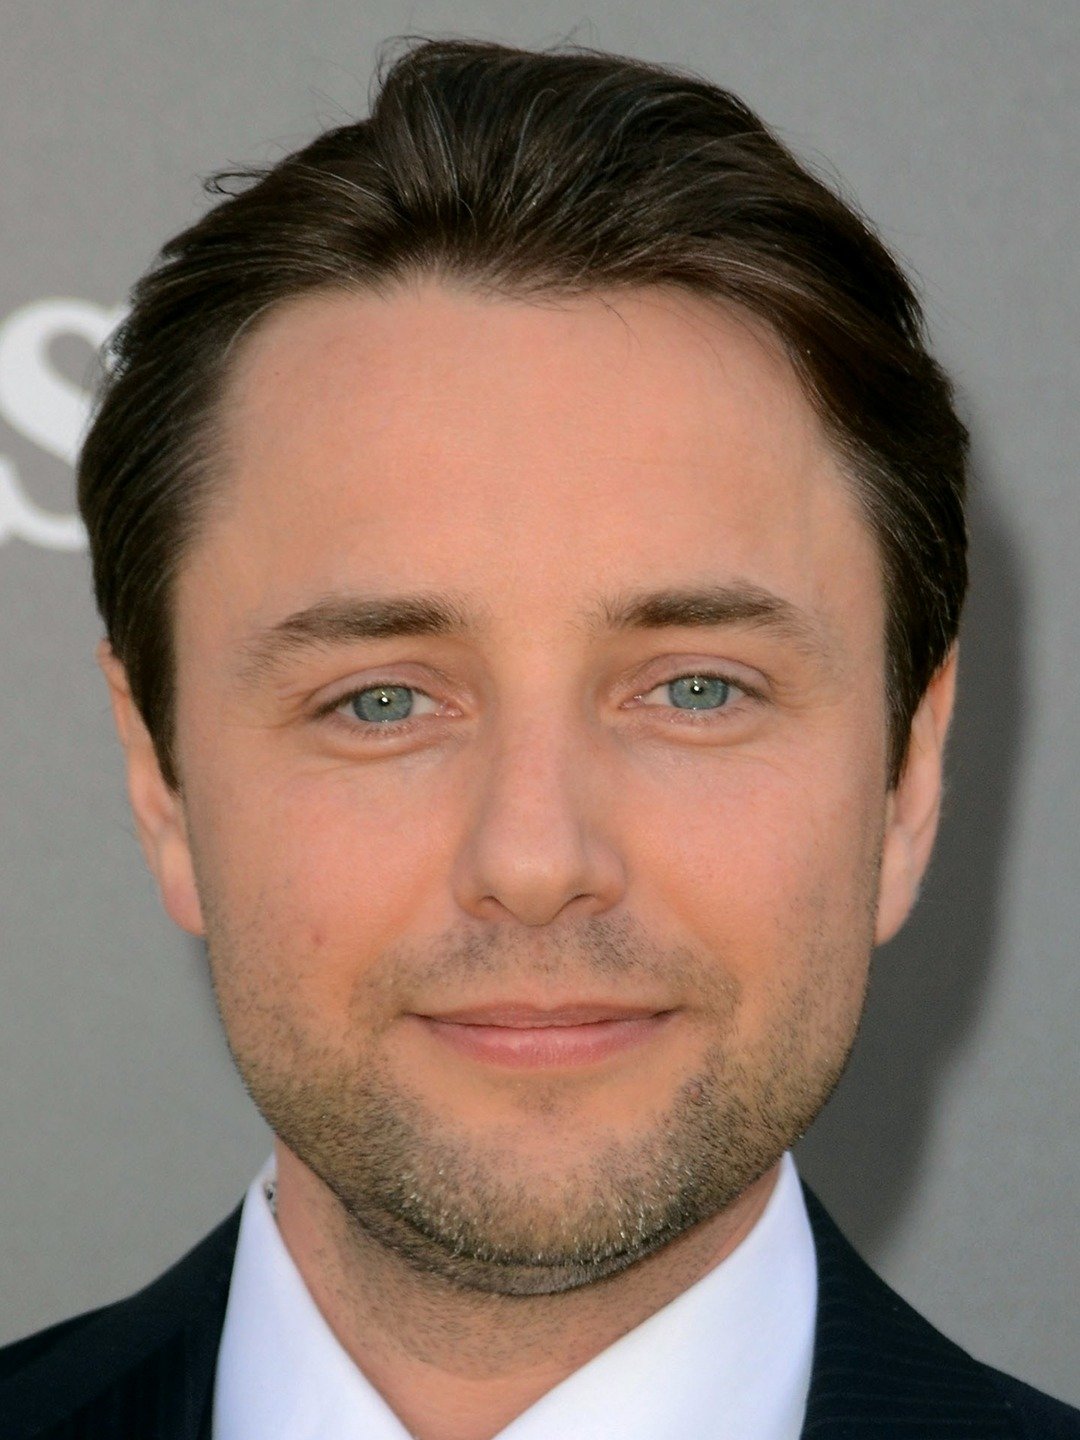 How tall is Vincent Kartheiser?